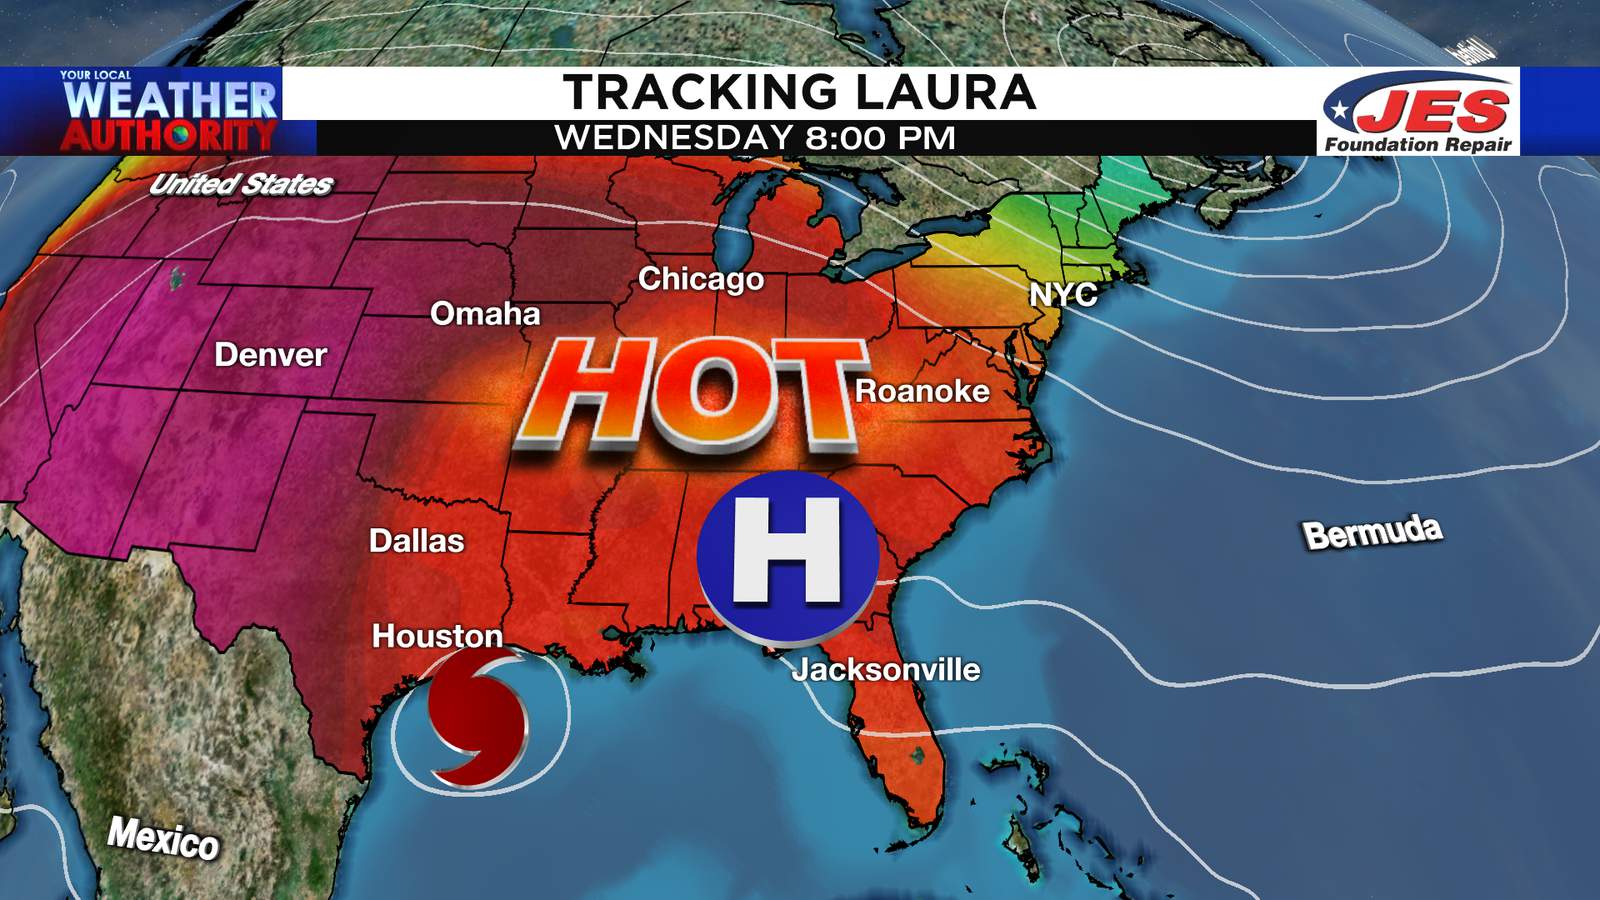 Short heat wave continues prior to local impacts from Laura